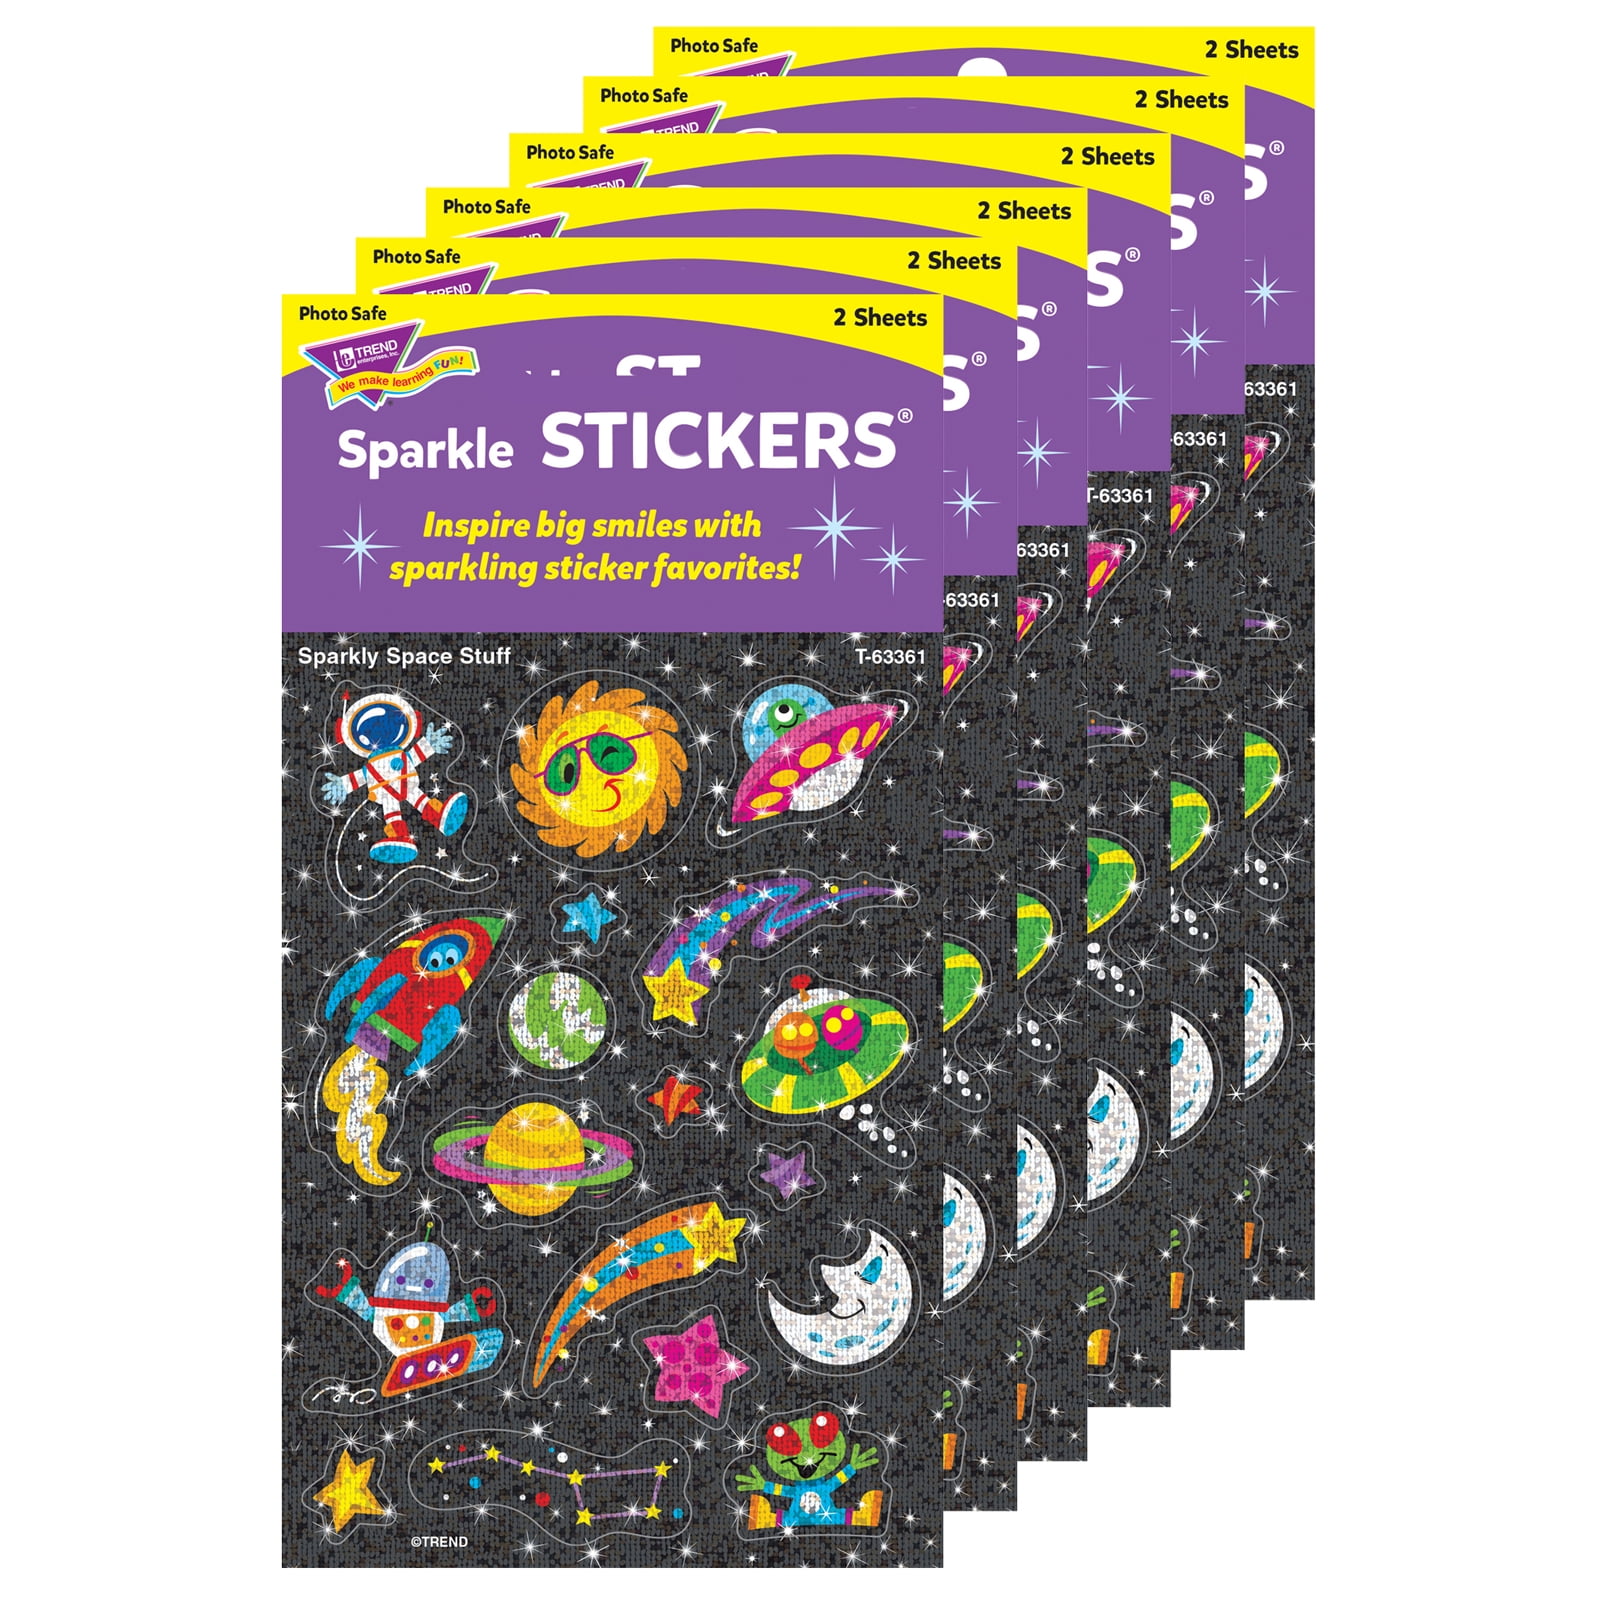 Trend Sparkly Space Stuff Sparkle Stickers , 36 per Pack, 6 Packs